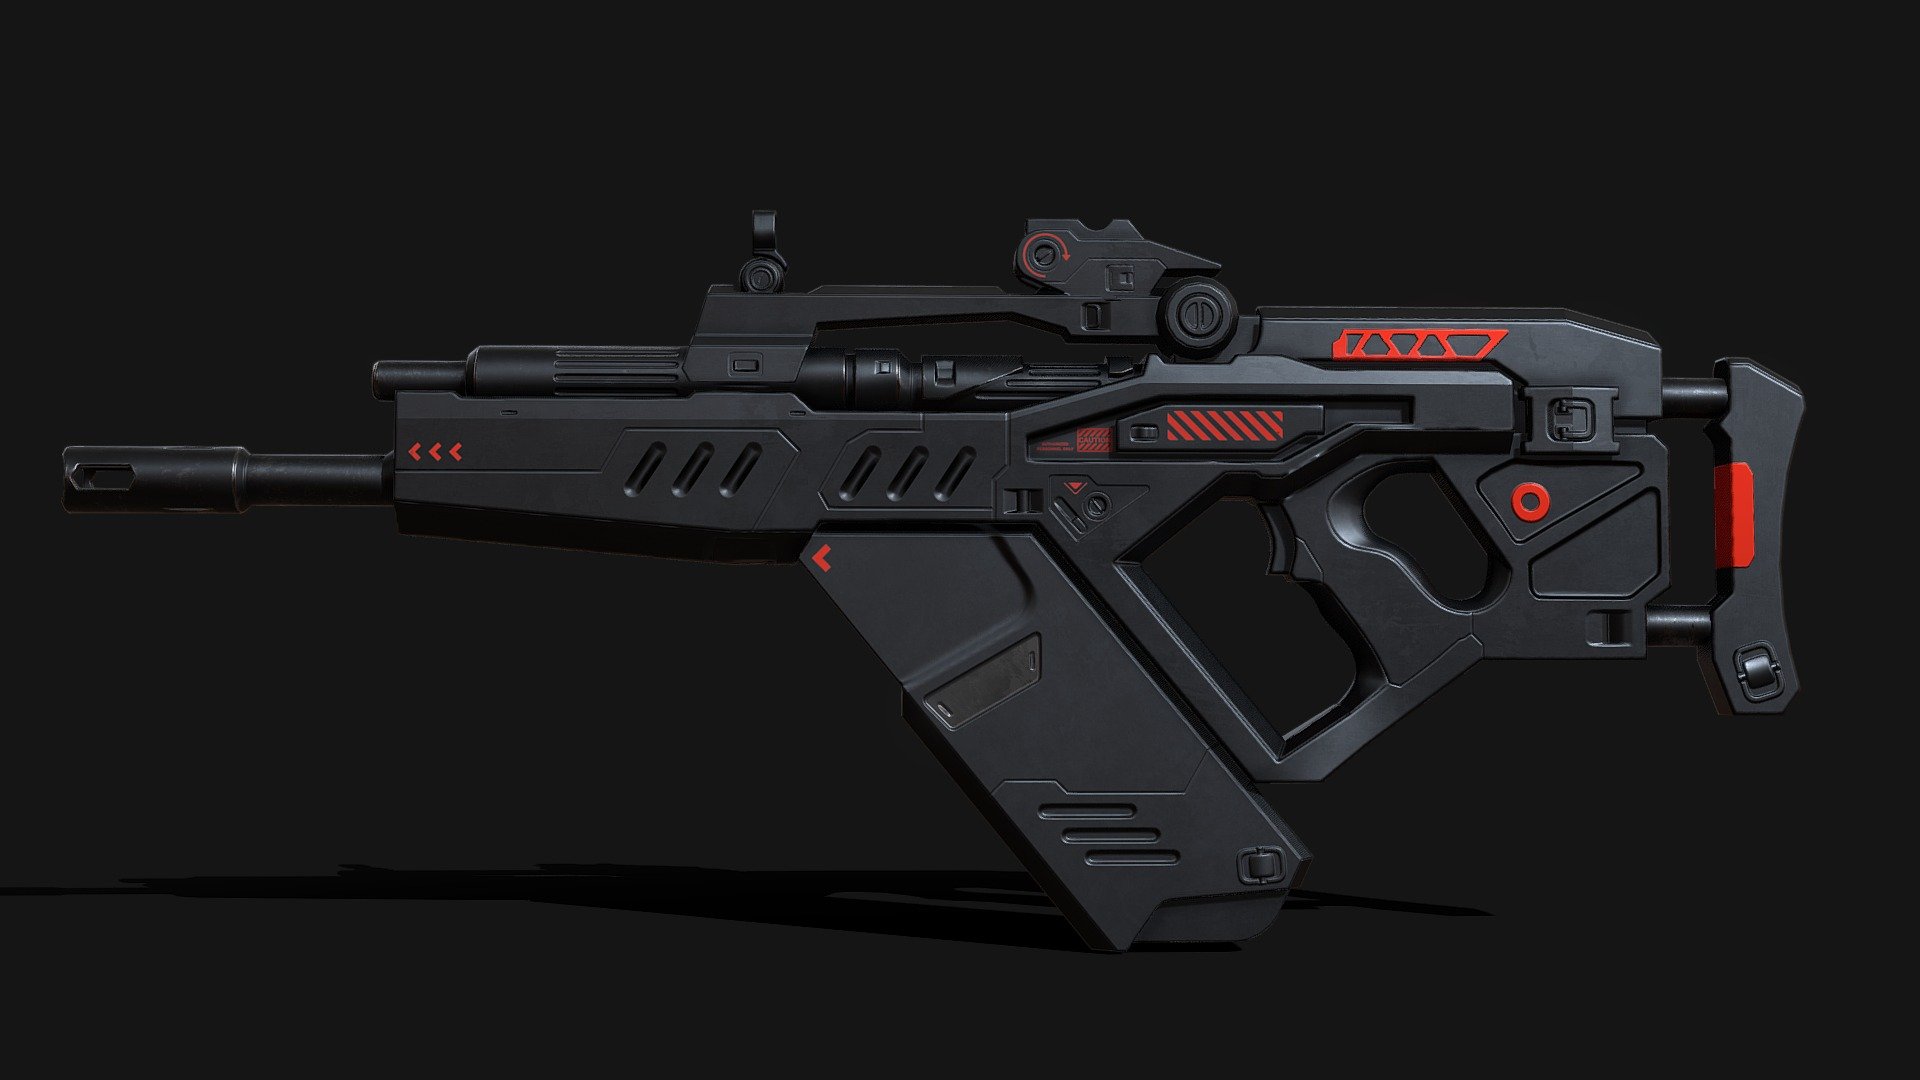 A futuristic submachine gun model, made with Blender + Substance Painter.

4k textures with chamfered normals, free to use 3d model